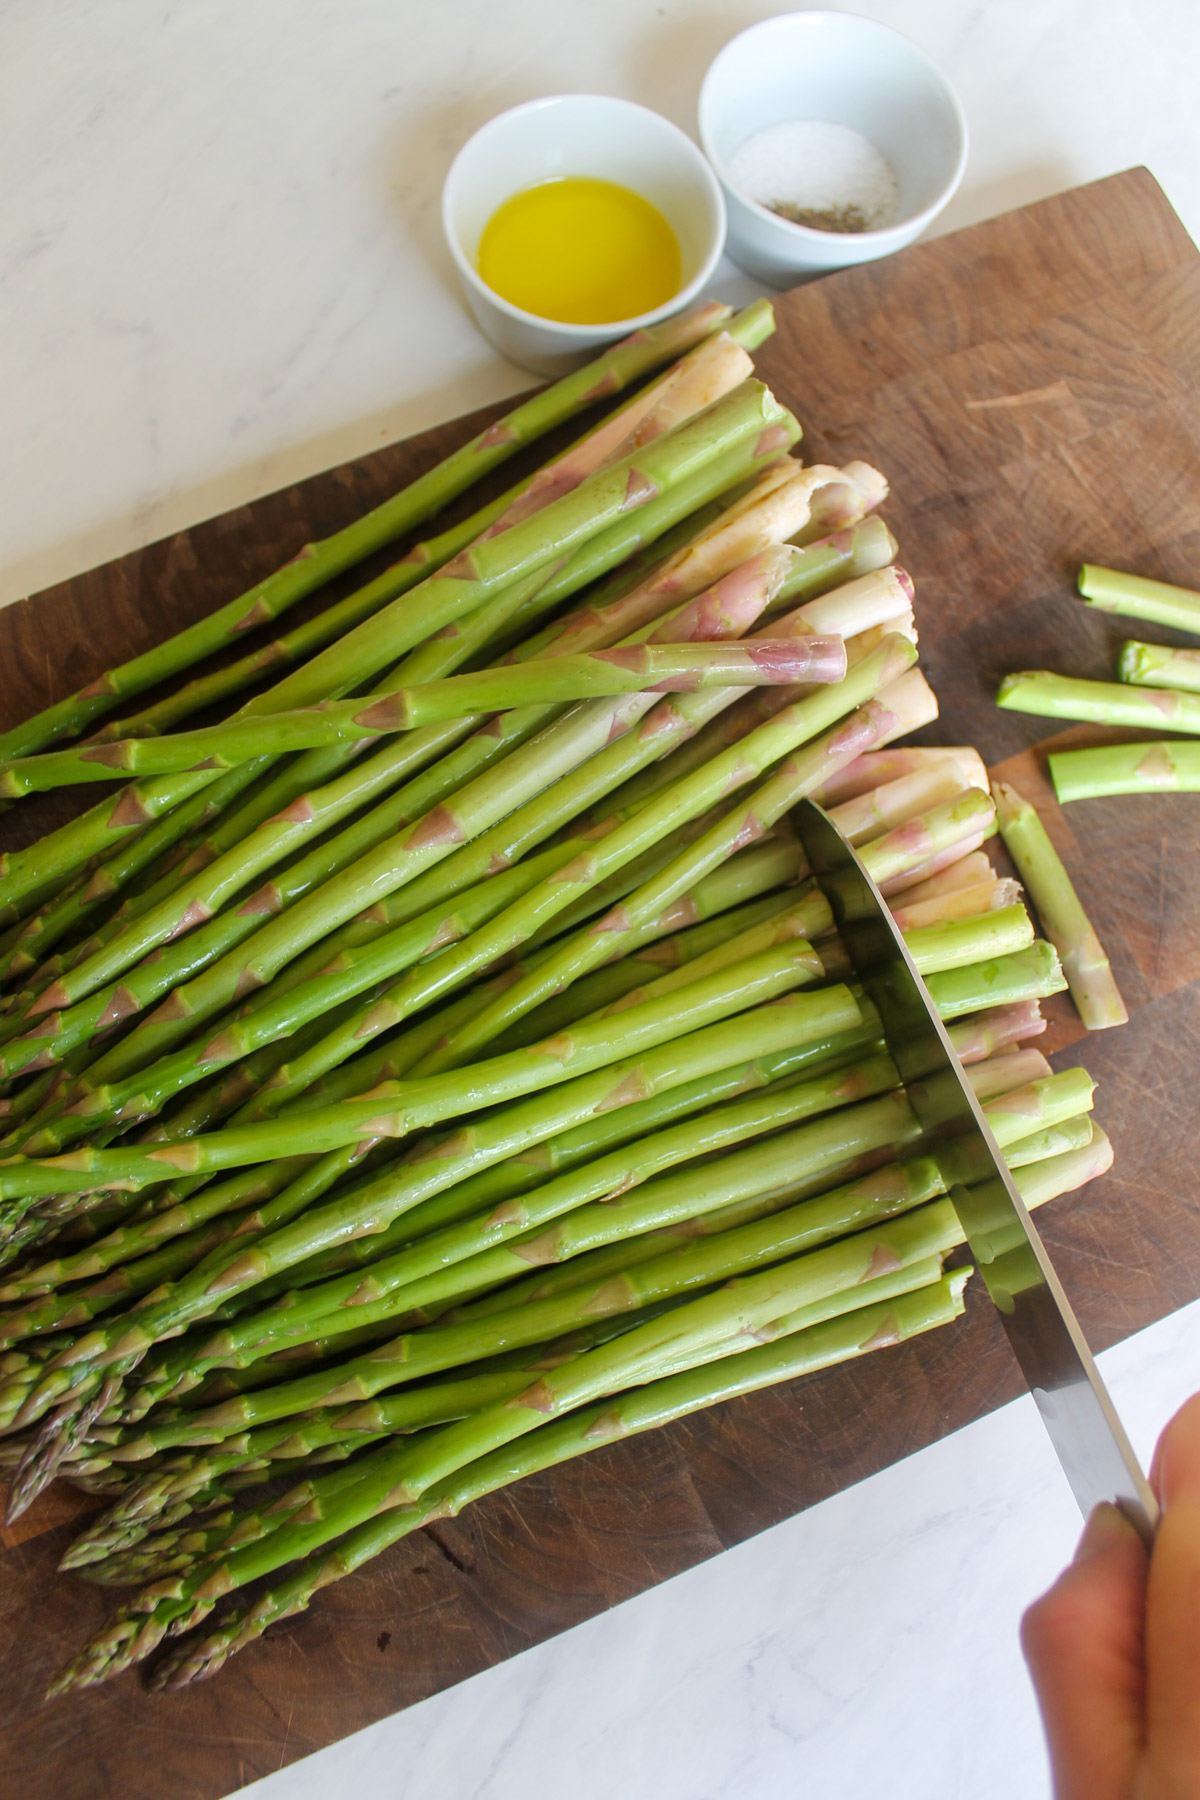 Trimming the ends of asparagus.